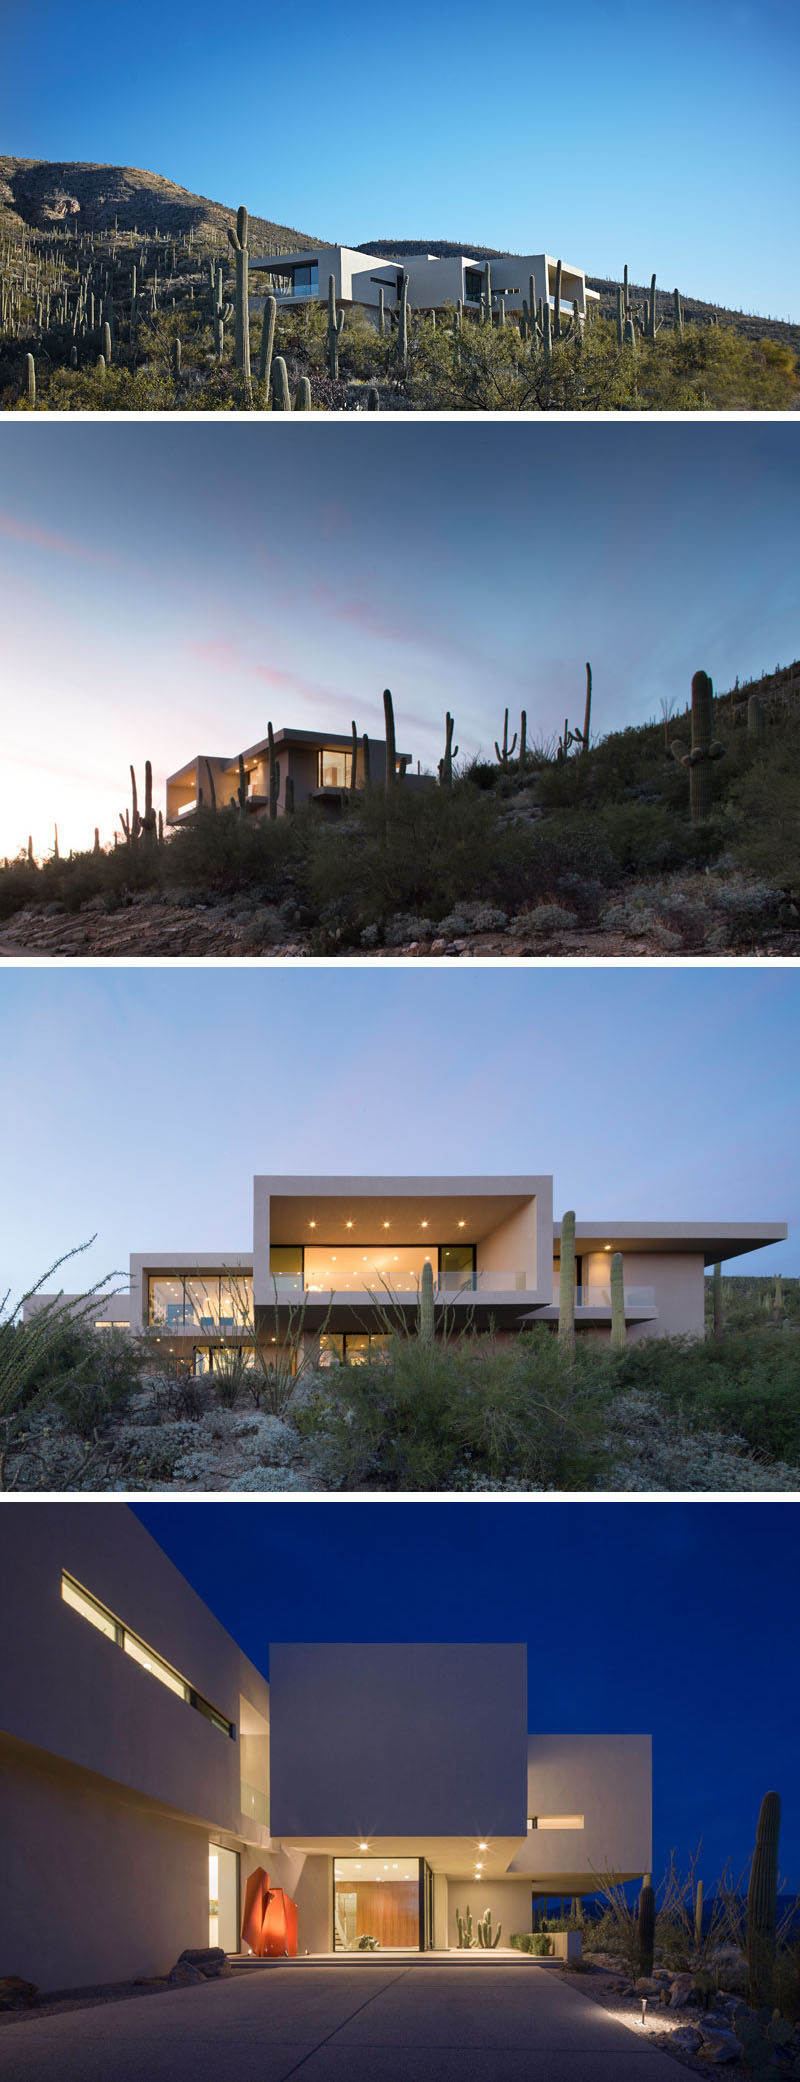 Kevin B. Howard Architects have designed a modern house in the foothills of Tucson, Arizona, for their client who requested a "modern, minimal home: a pristine box that seemed to have landed in the desert.” #ModernHouse #Architecture